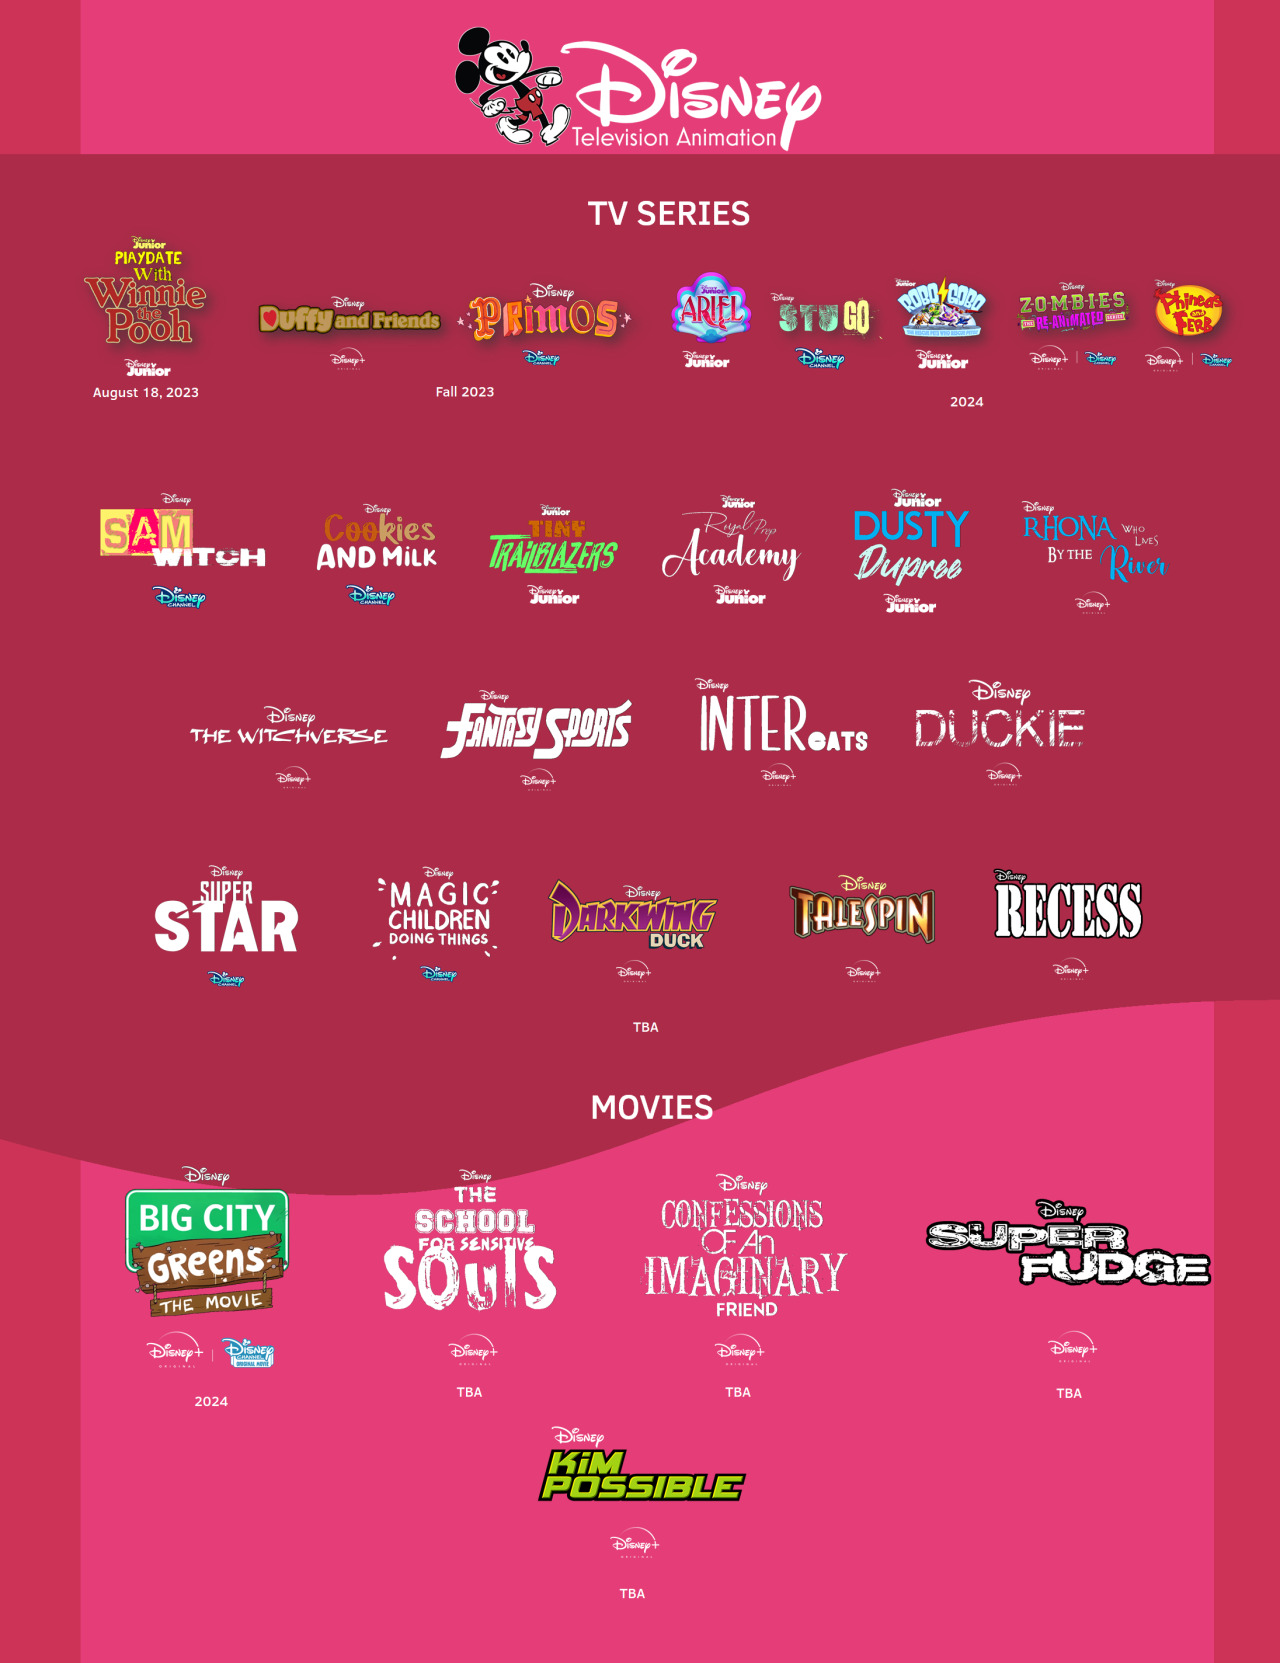 Decided to make an infographic with all the... Disney Television